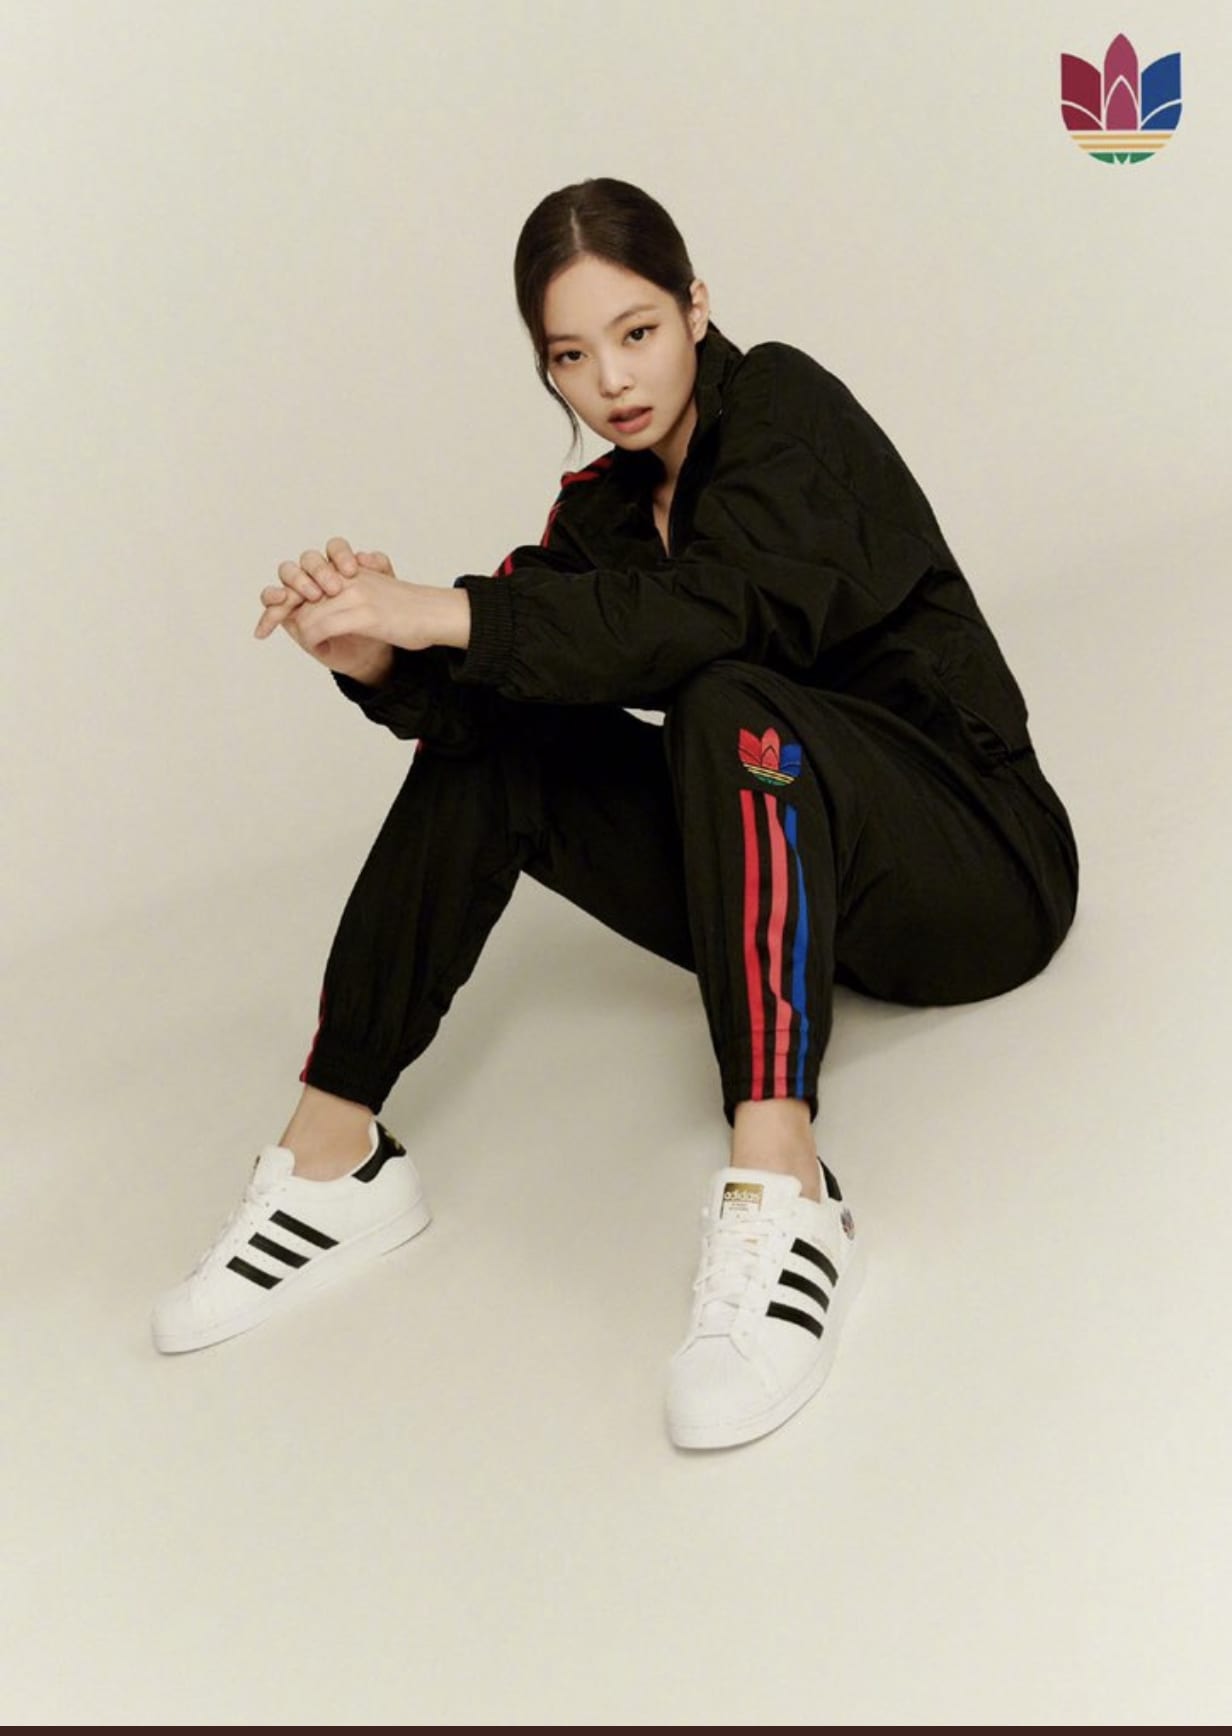 BLACKPINK members started wearing their ADIDAS. So why not LISA ...